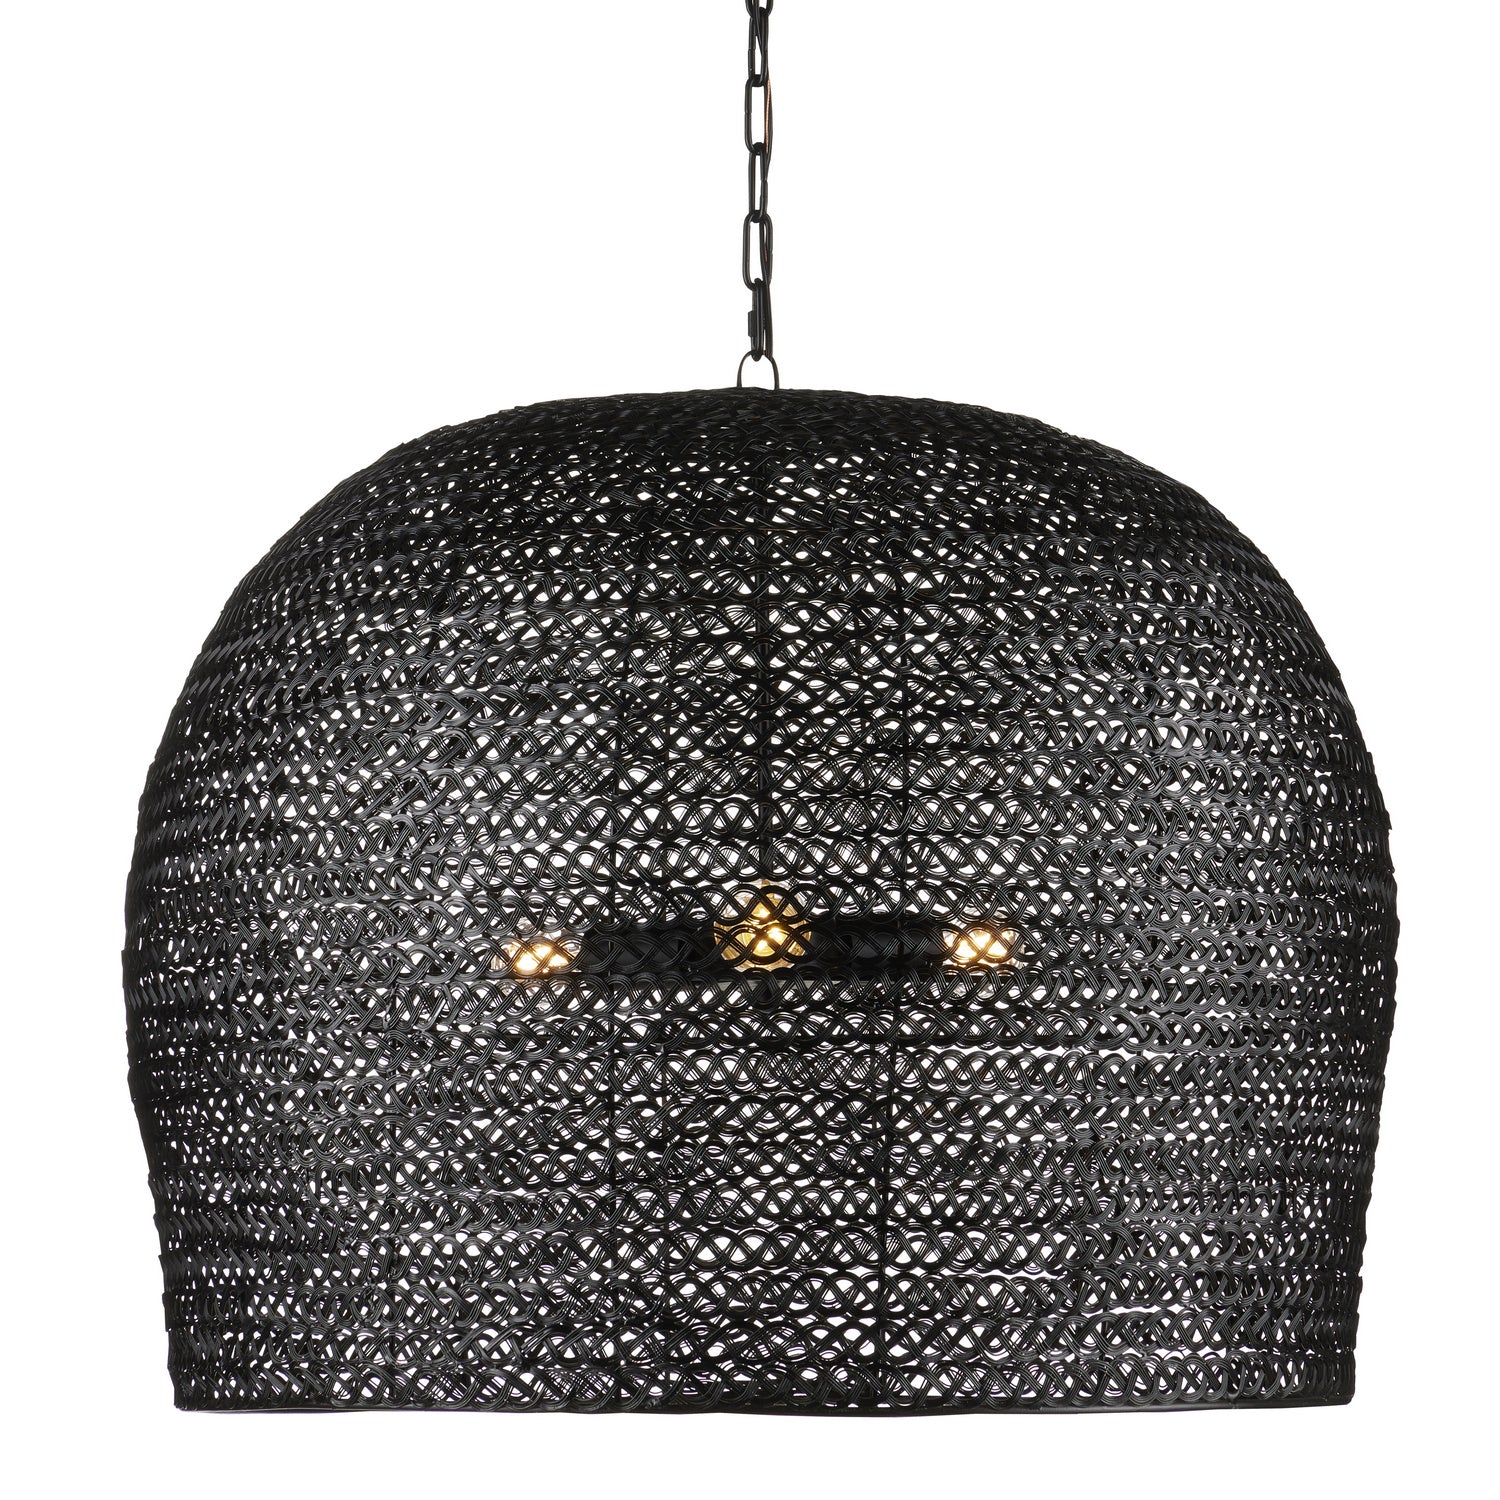 Three Light Pendant from the Piero collection in Satin Black finish